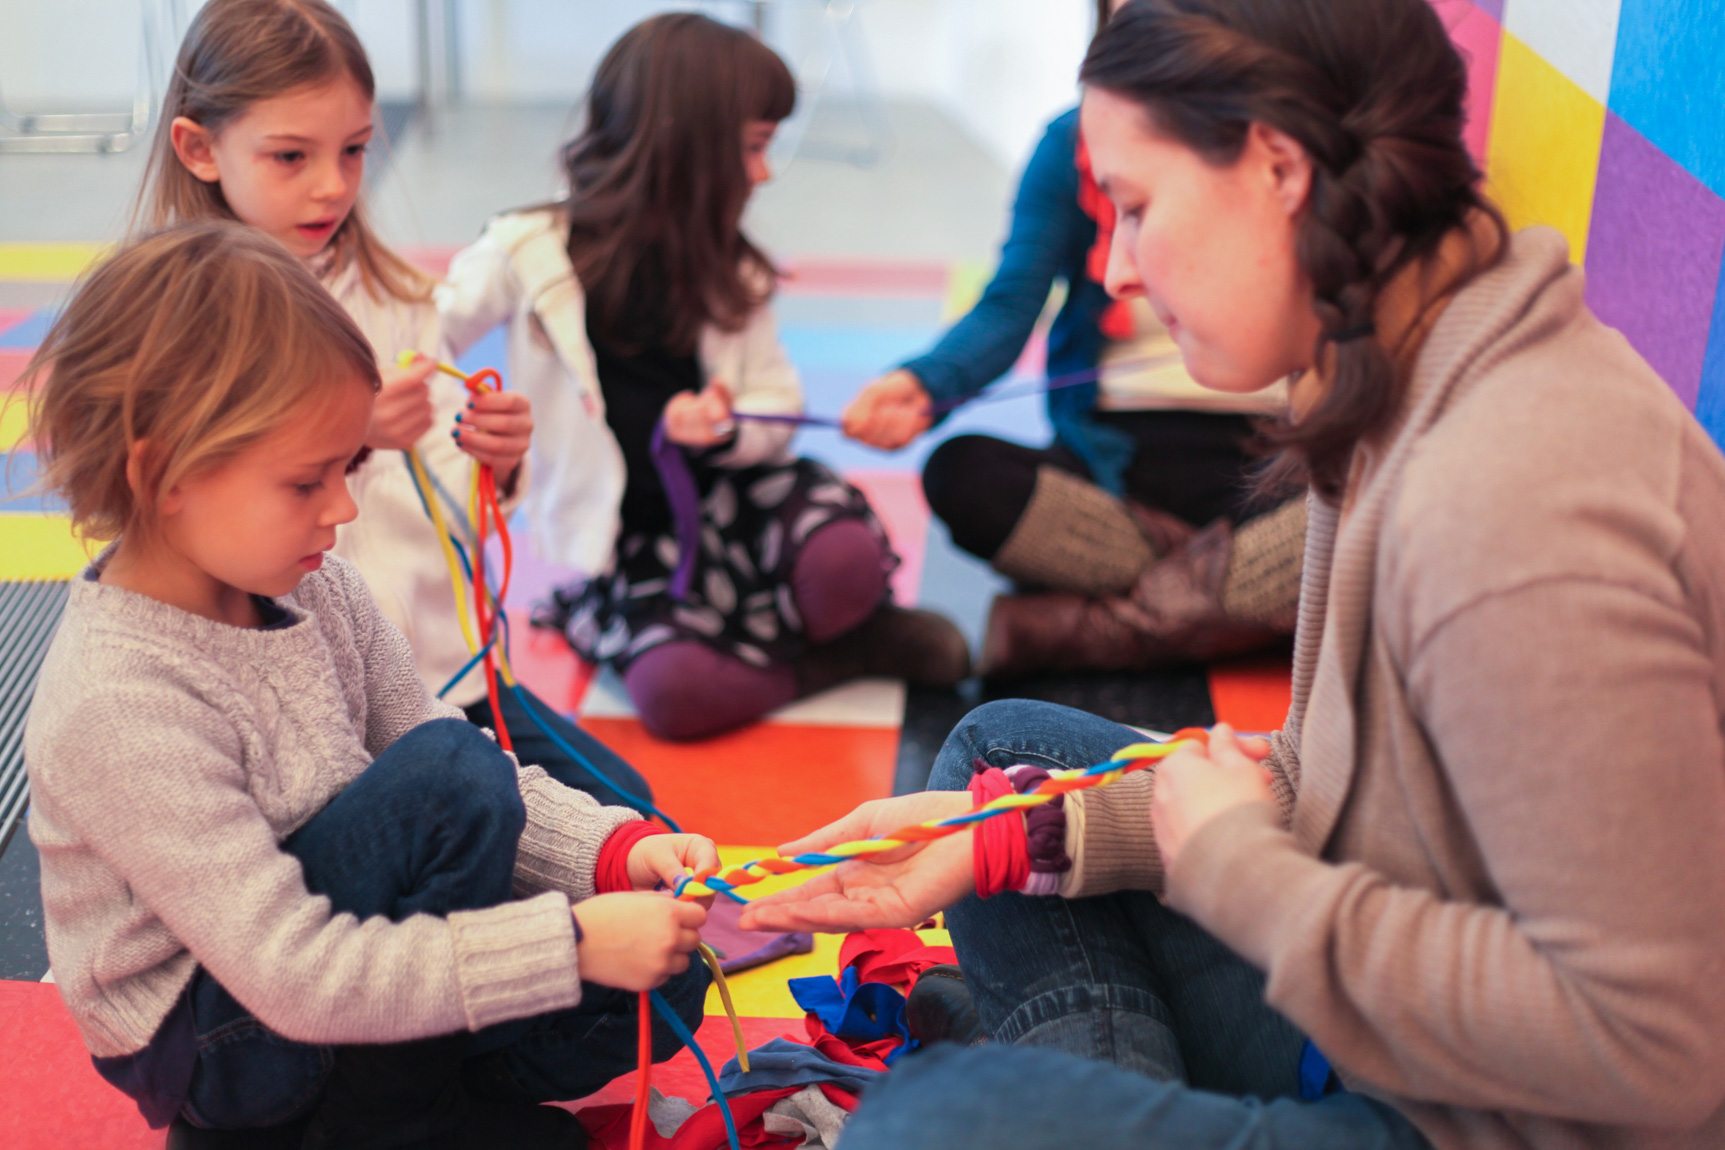 Visitors and their children braid colored ropes together, sitting against David Scanavino's installation "Candy Crush."